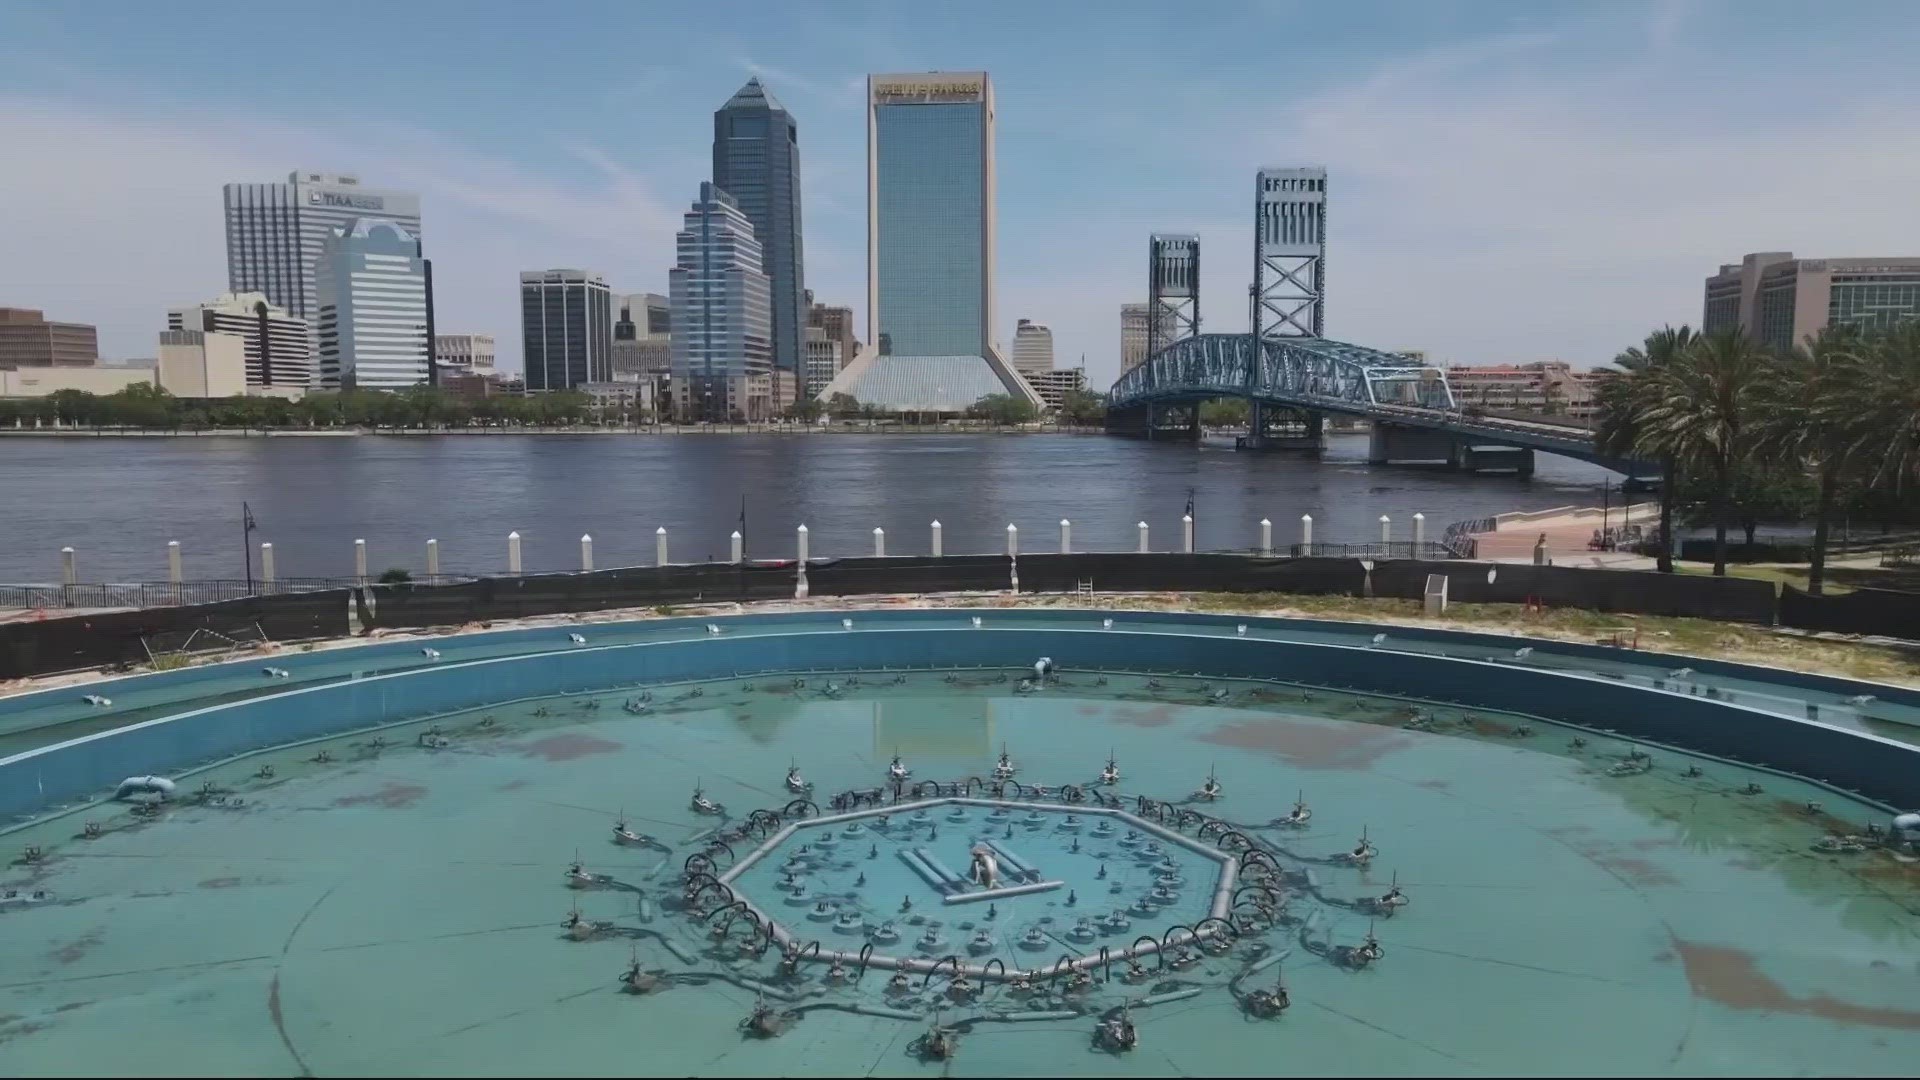 The Friendship Fountain, one of Jacksonville's iconic landmarks, has not been open since the COVID-19 pandemic due to delays in audio equipment.